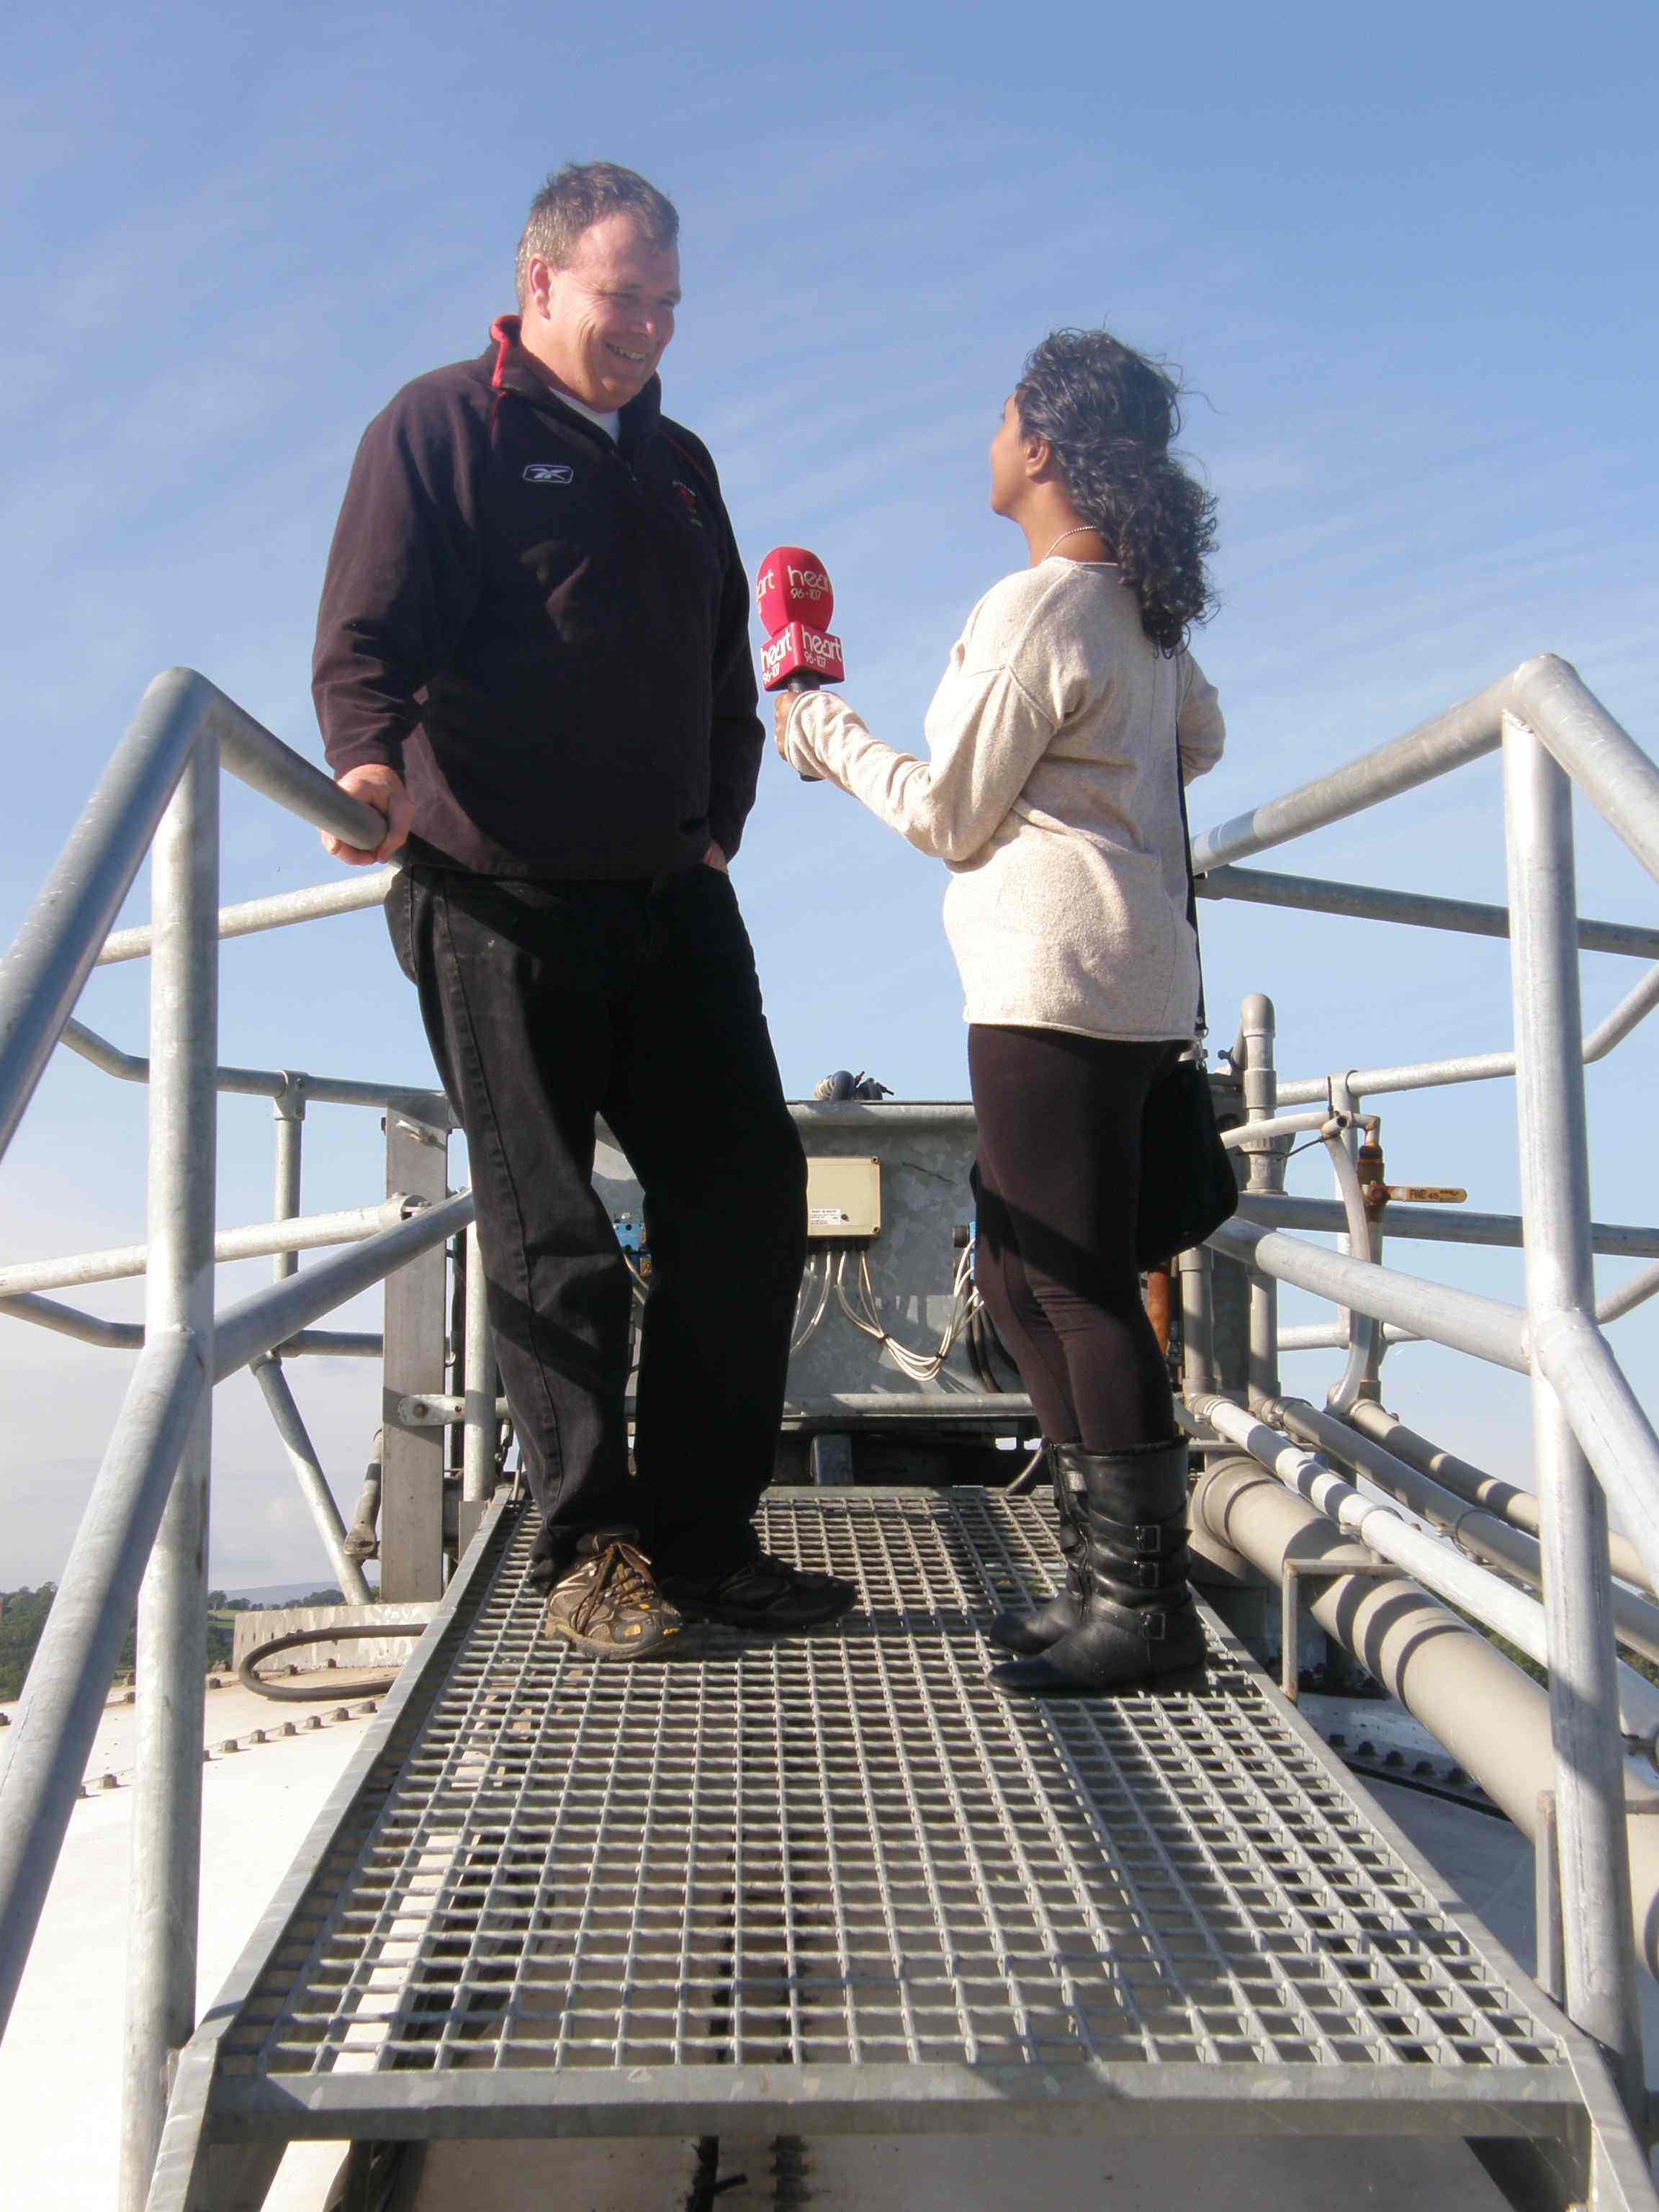 Richard Tomlinson and Charlene Smith on top of the Fre-energy digester at Lodge Farm